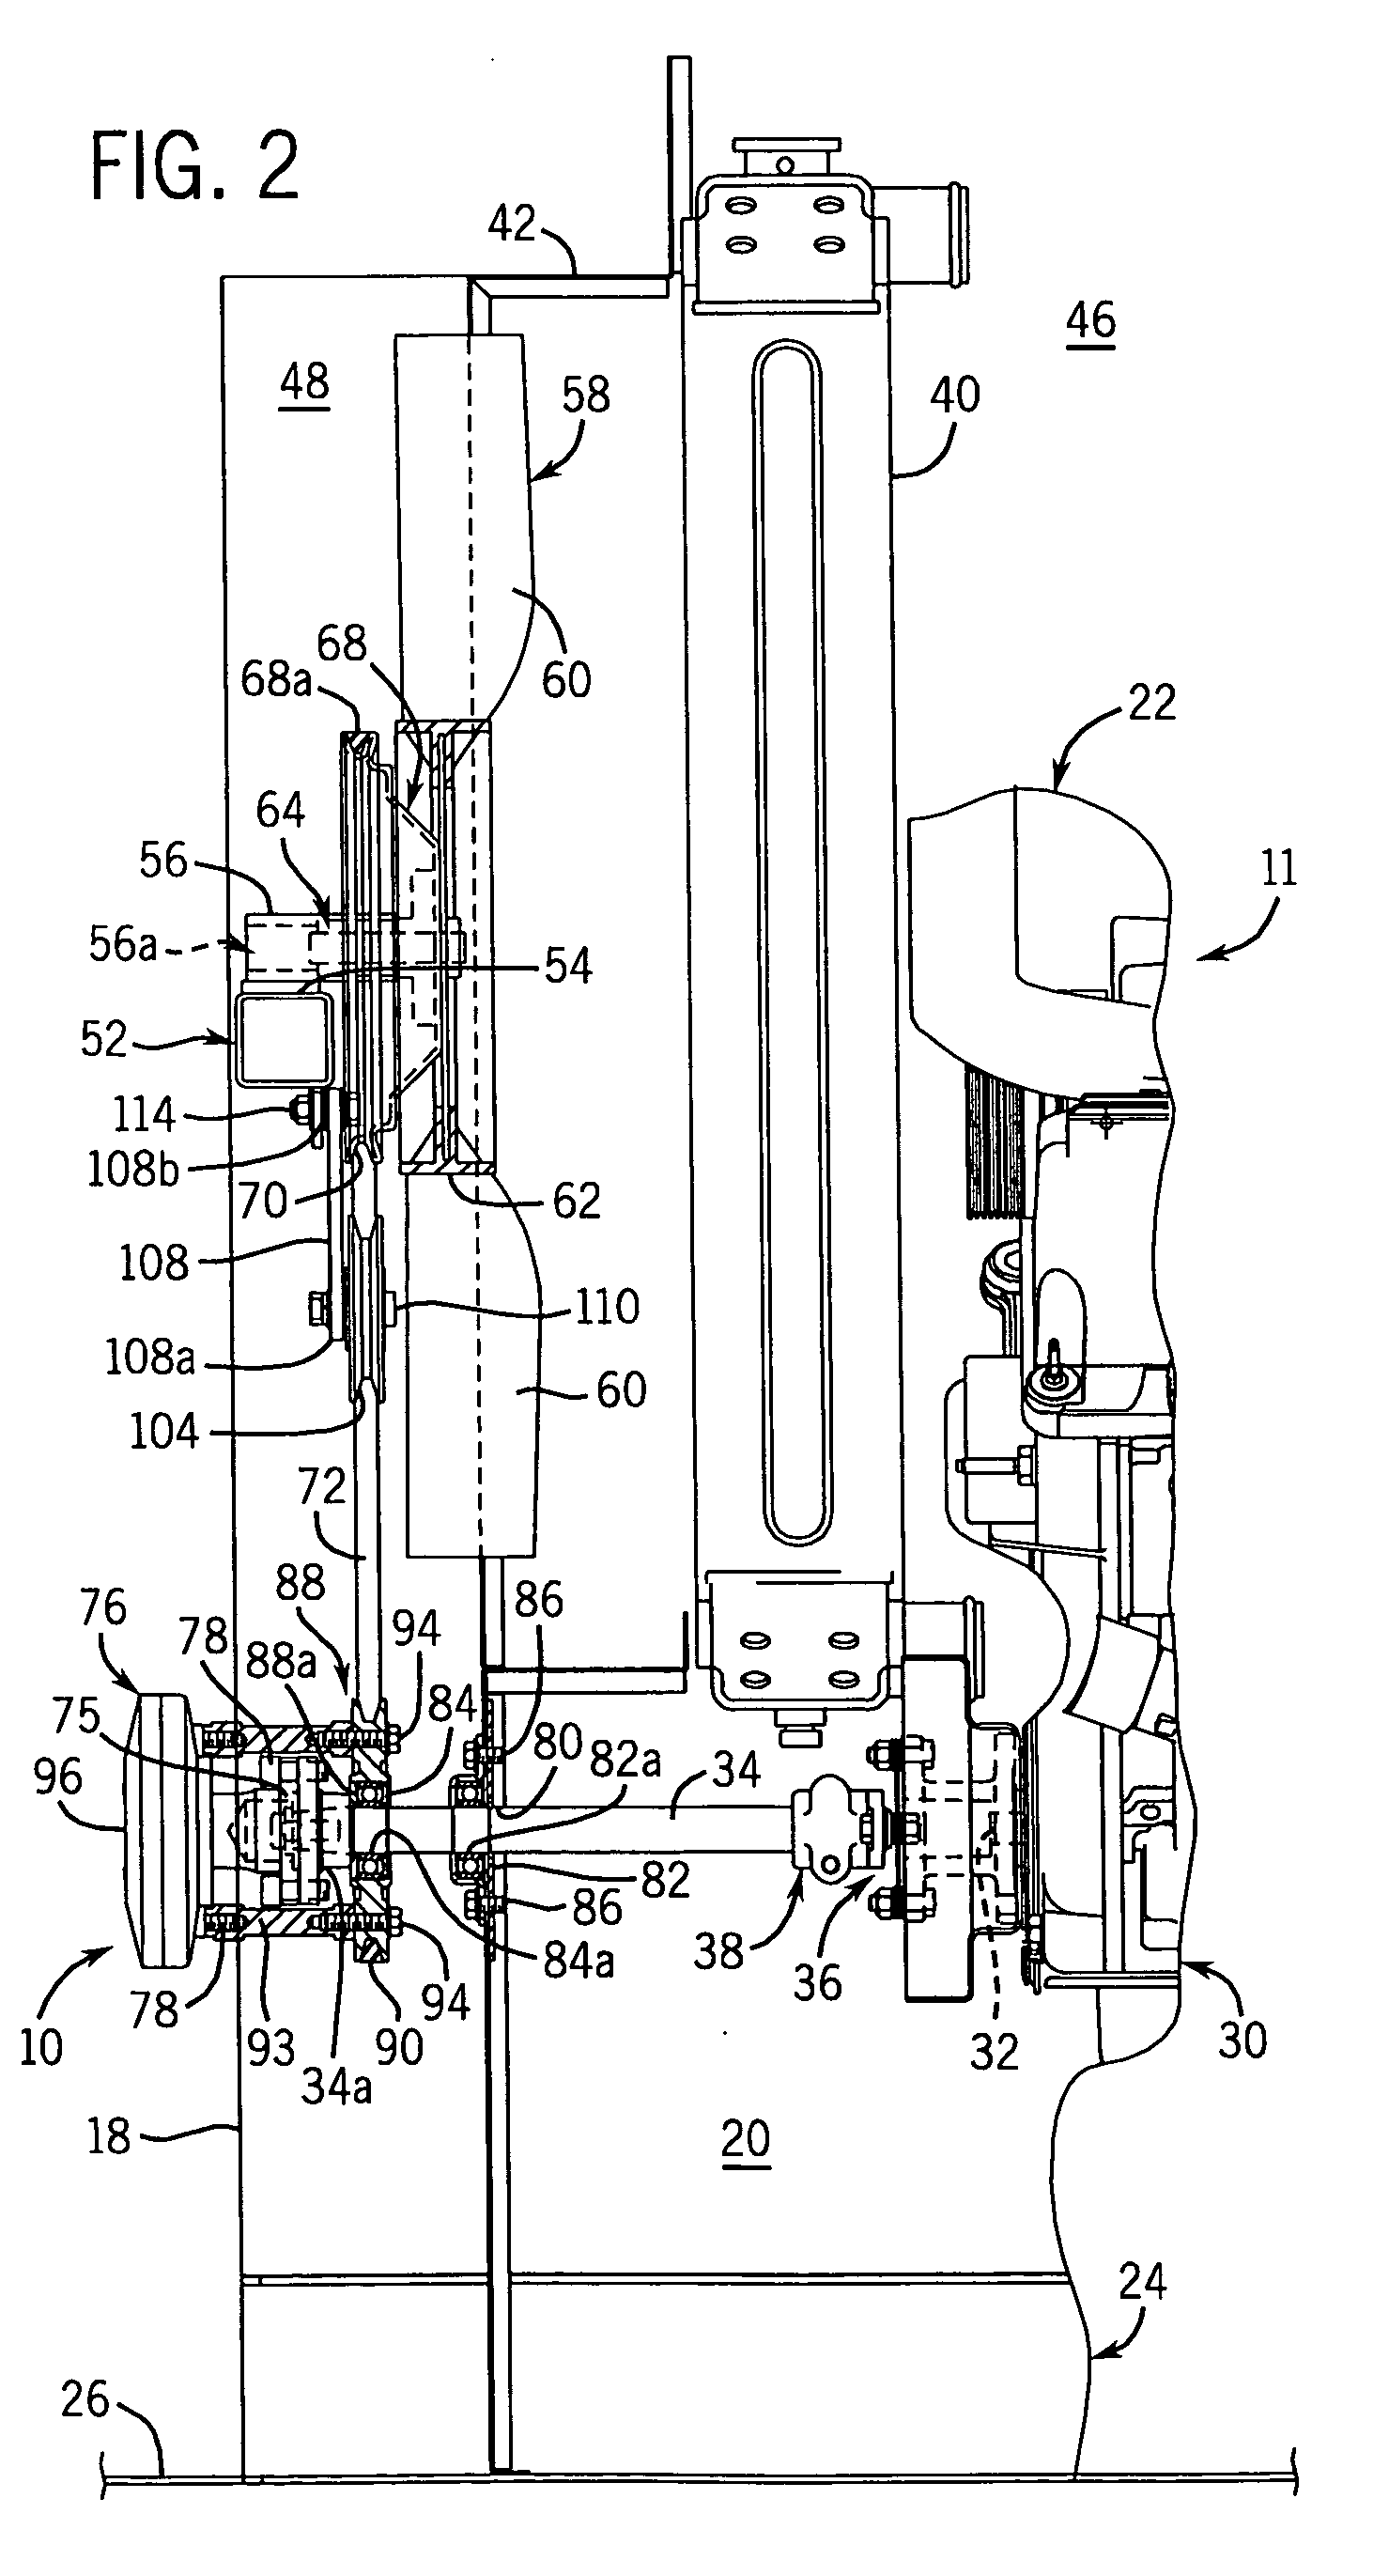 Apparatus and method for cooling engine coolant flowing through a radiator